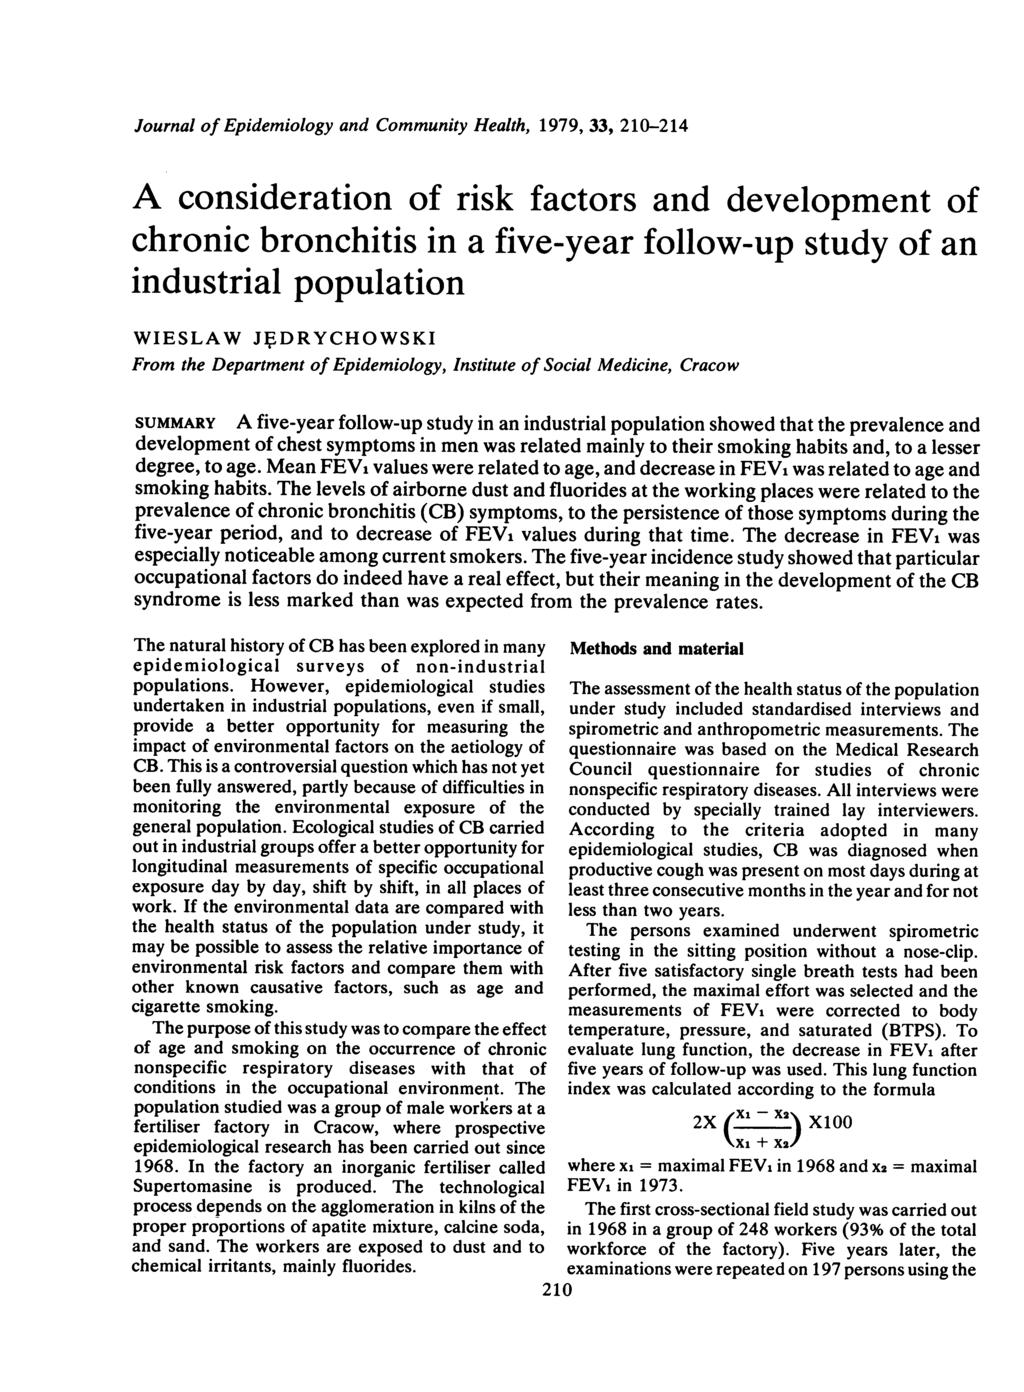 Journal of Epidemiology and Community Health, 1979, 33, 210-214 A consideration of risk factors and development of chronic bronchitis in a five-year follow-up study of an industrial population